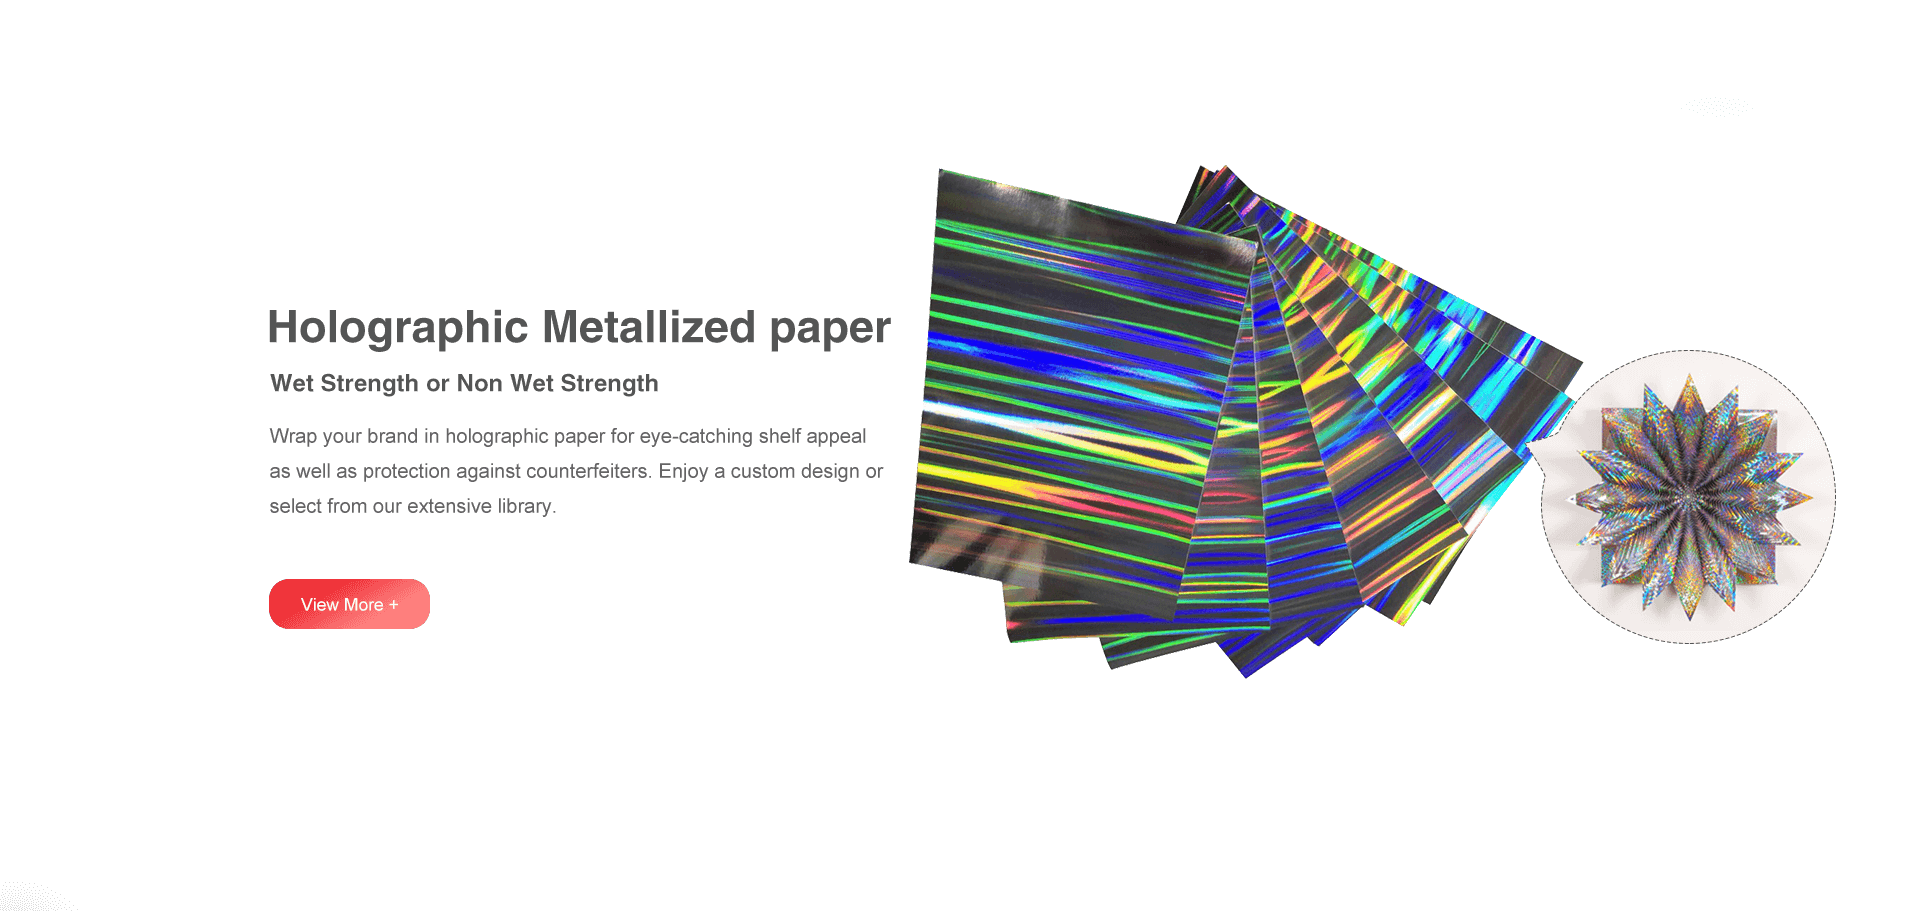 Holographic Metallized Paper